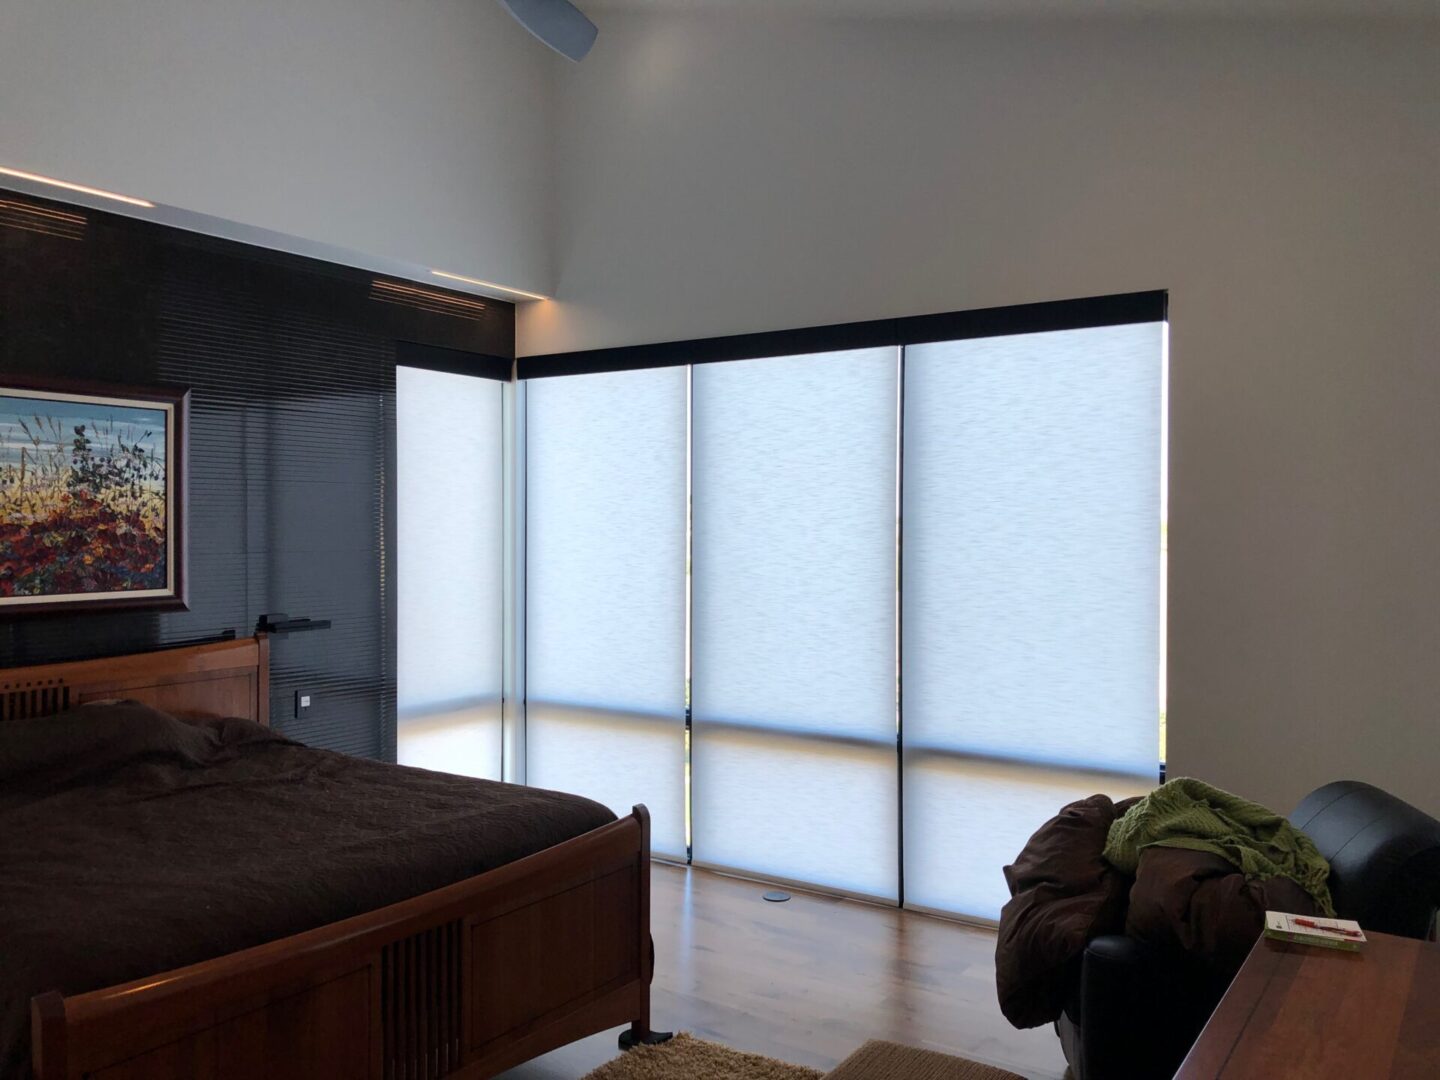 Image of shades inside a bedroom